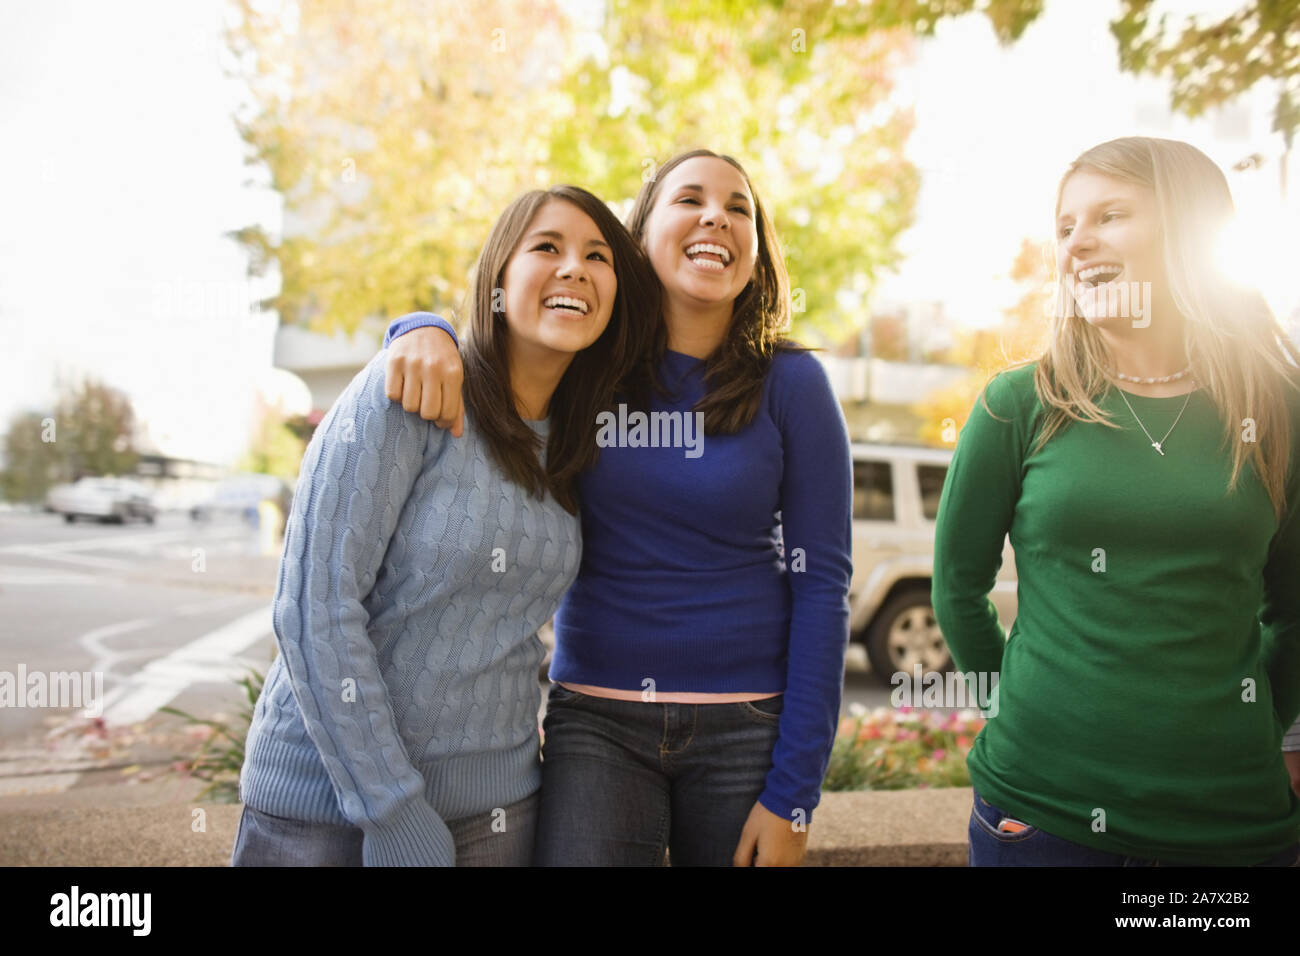 Three laughing young woman standing side by side on a suburban street. Stock Photo